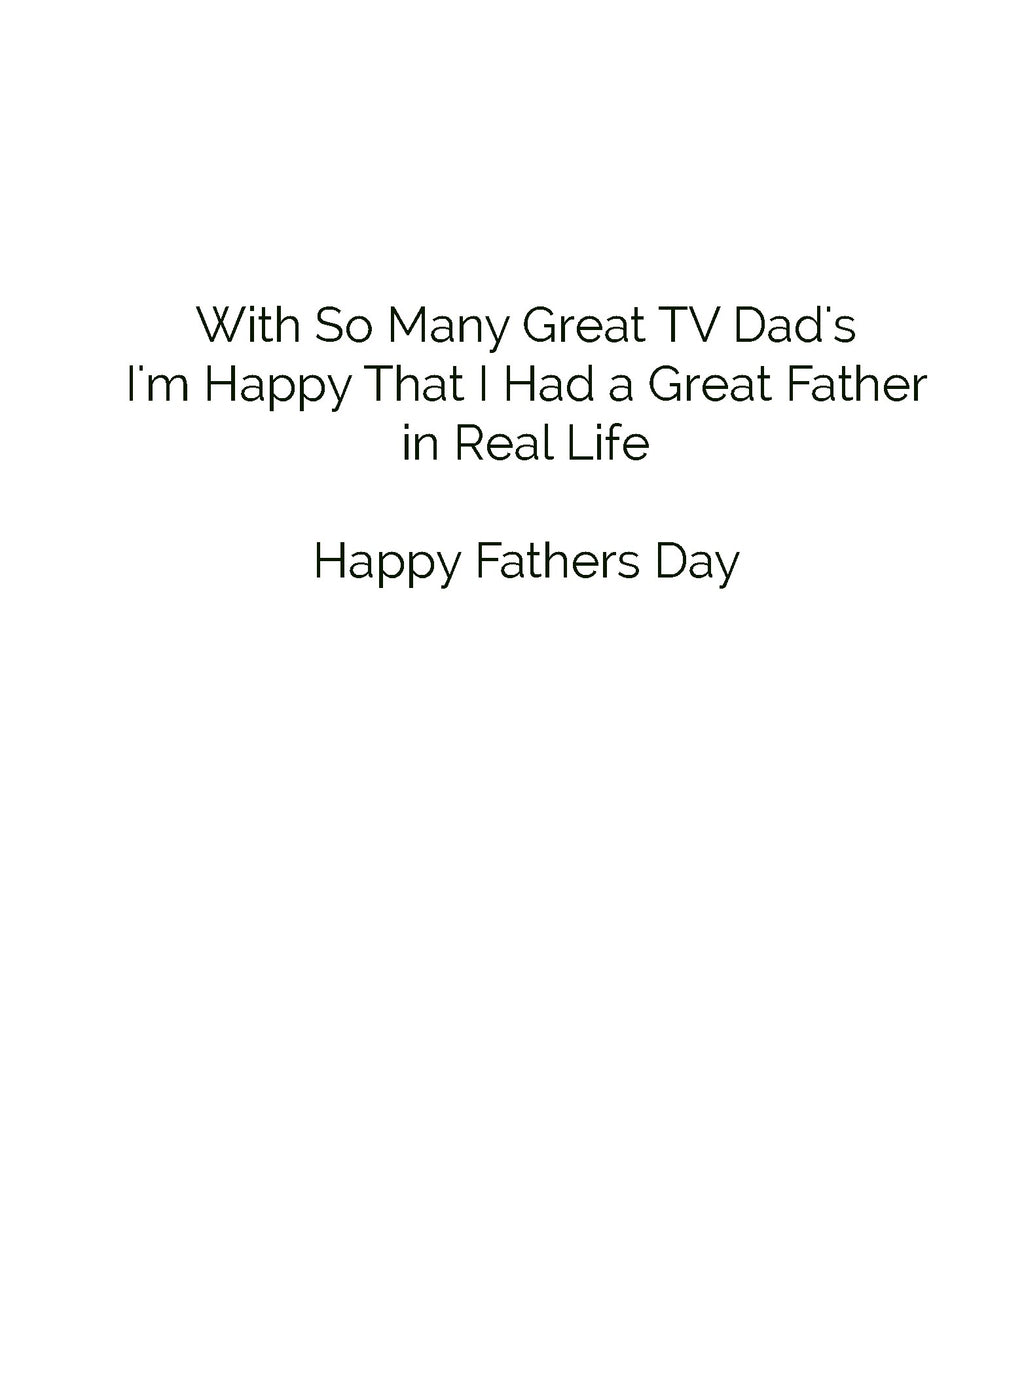 Happy Father's Day-The Real Thing